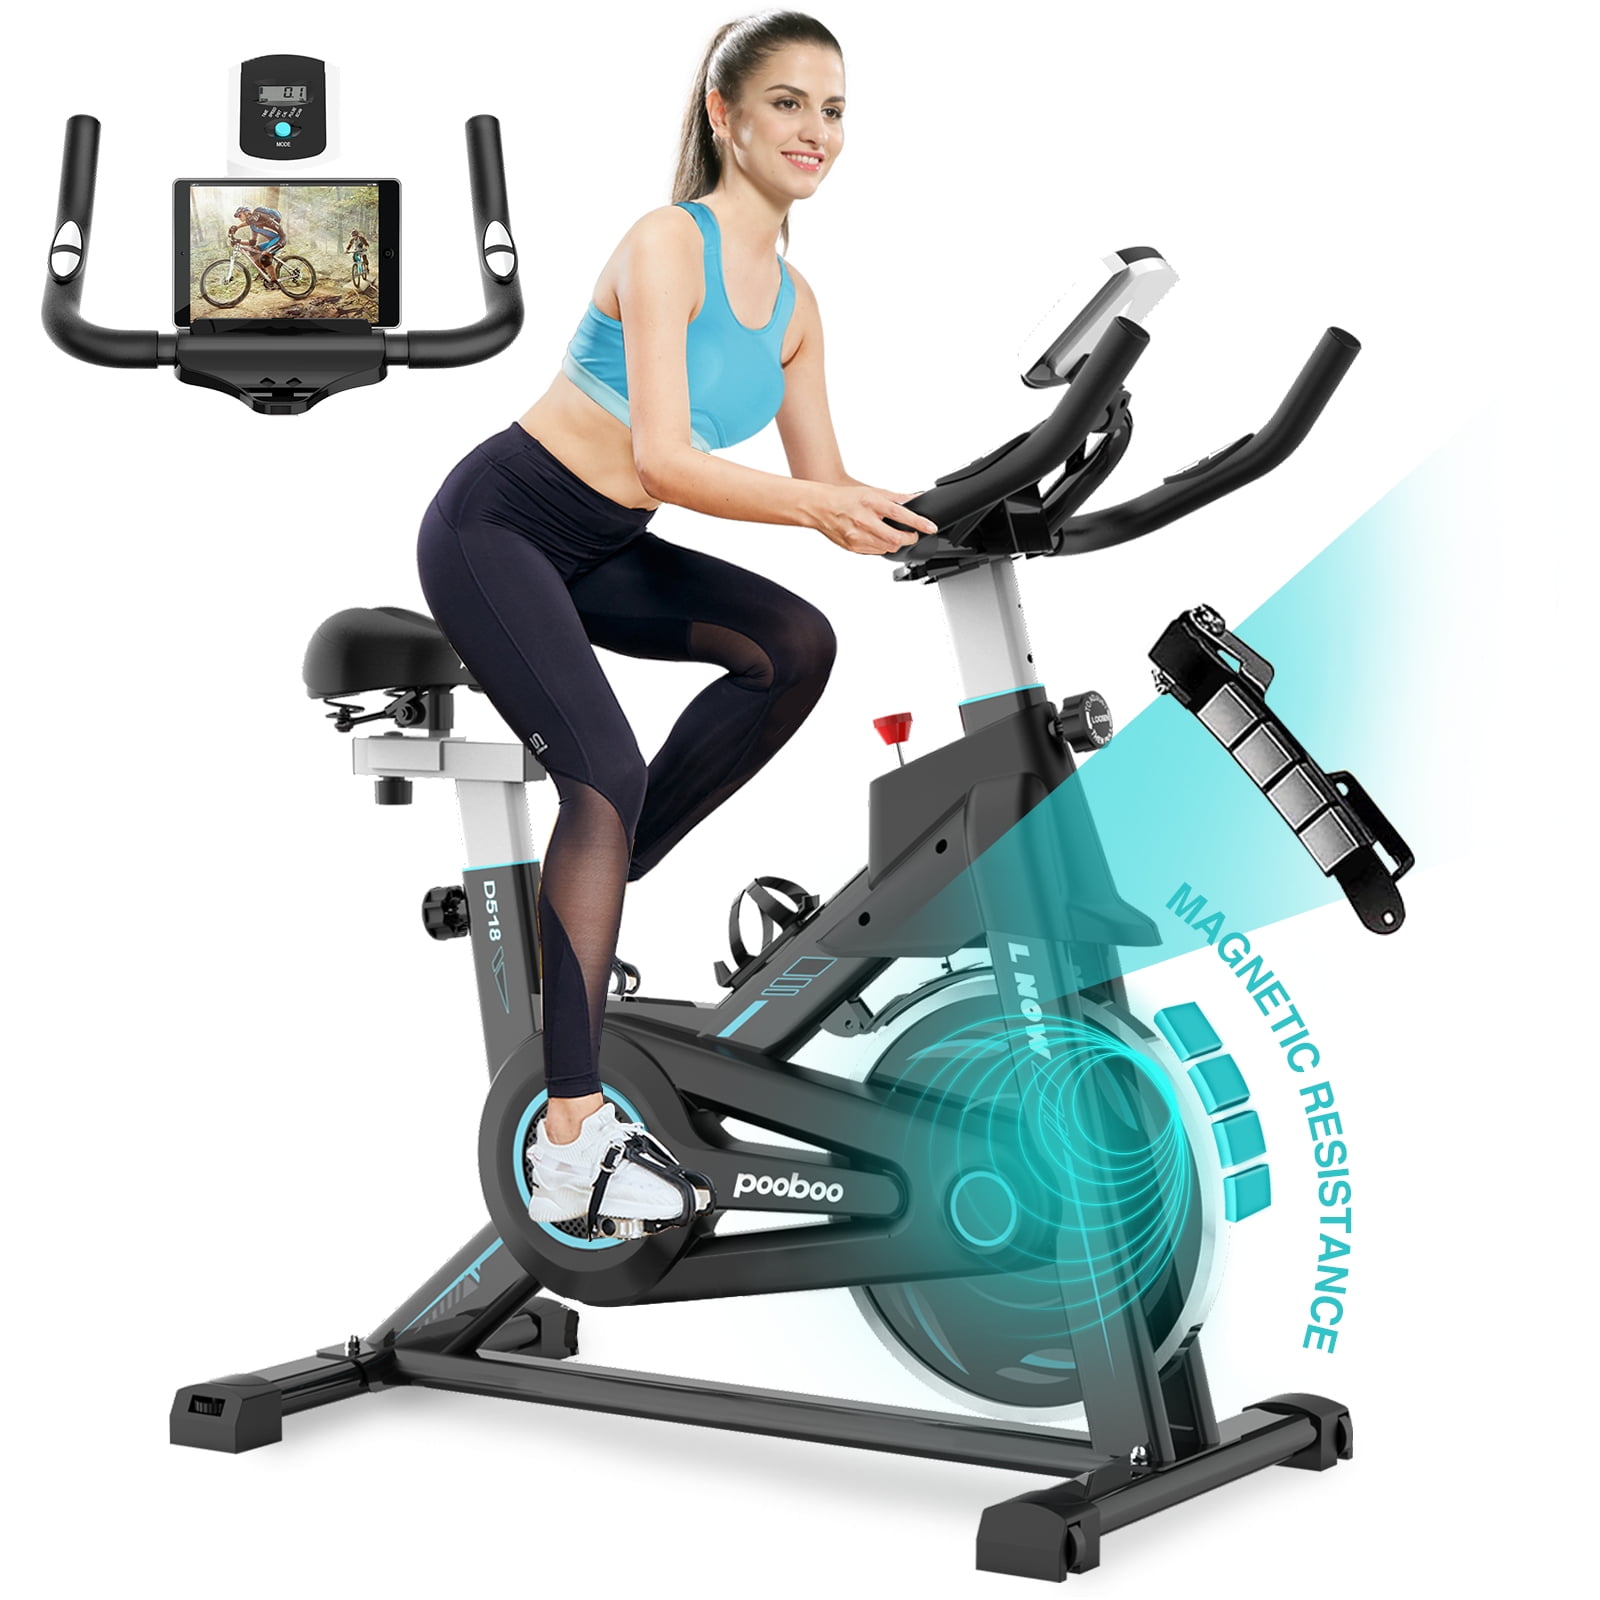 Pooboo Indoor Exercise Bike Stationary Cycling Bicycle Cardio Fitness Workout